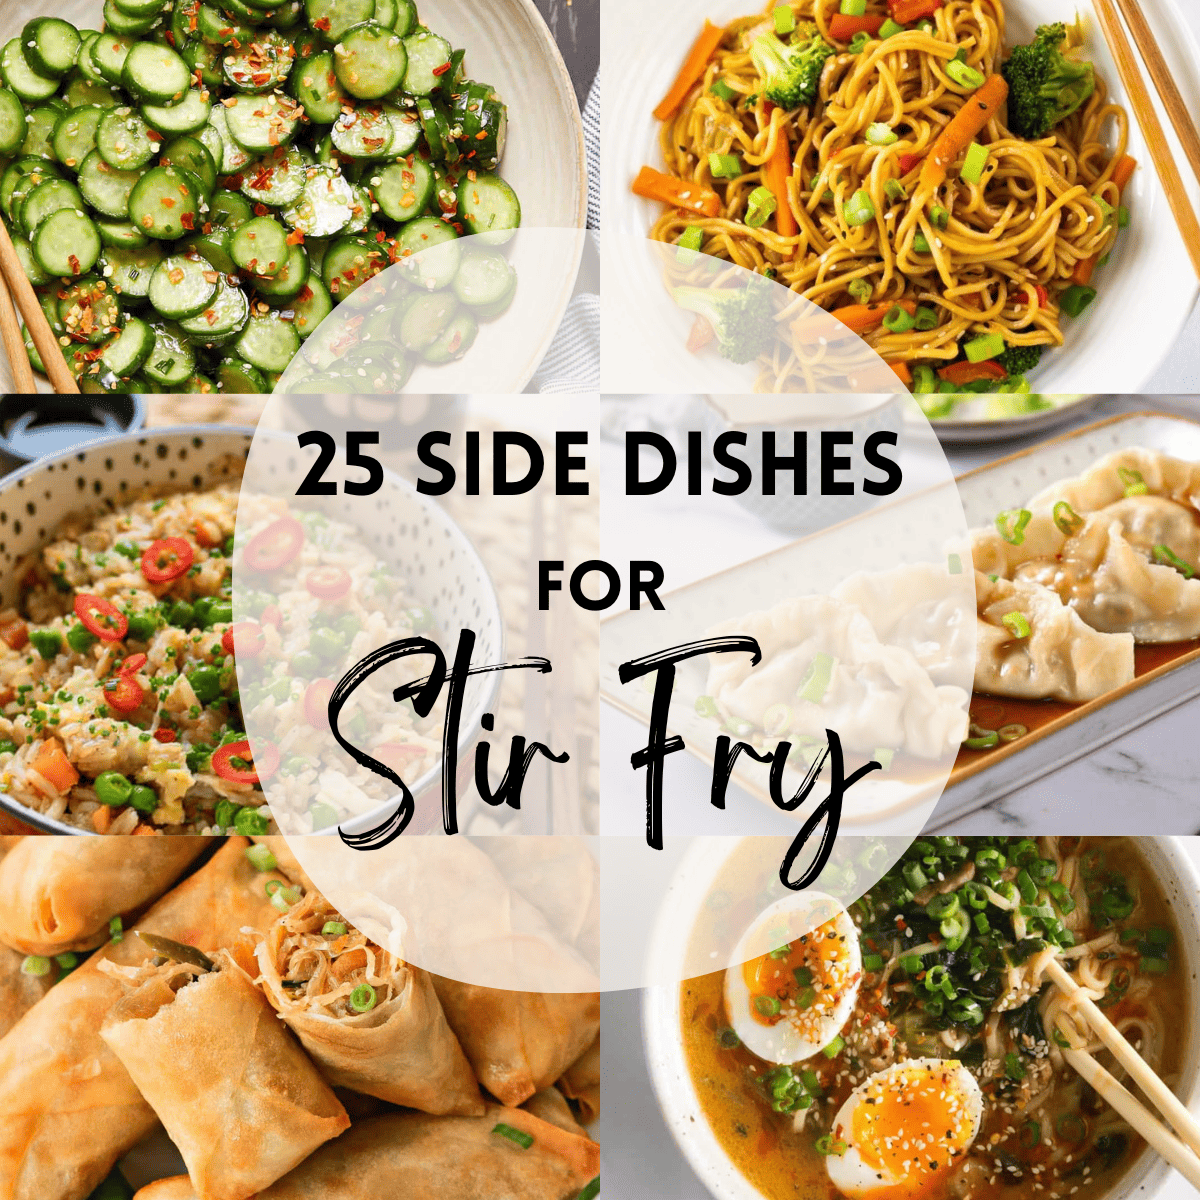 A 6 photo collage showing side dishes for stir fry with text overlay that says '25 side dishes for stir fry'. 